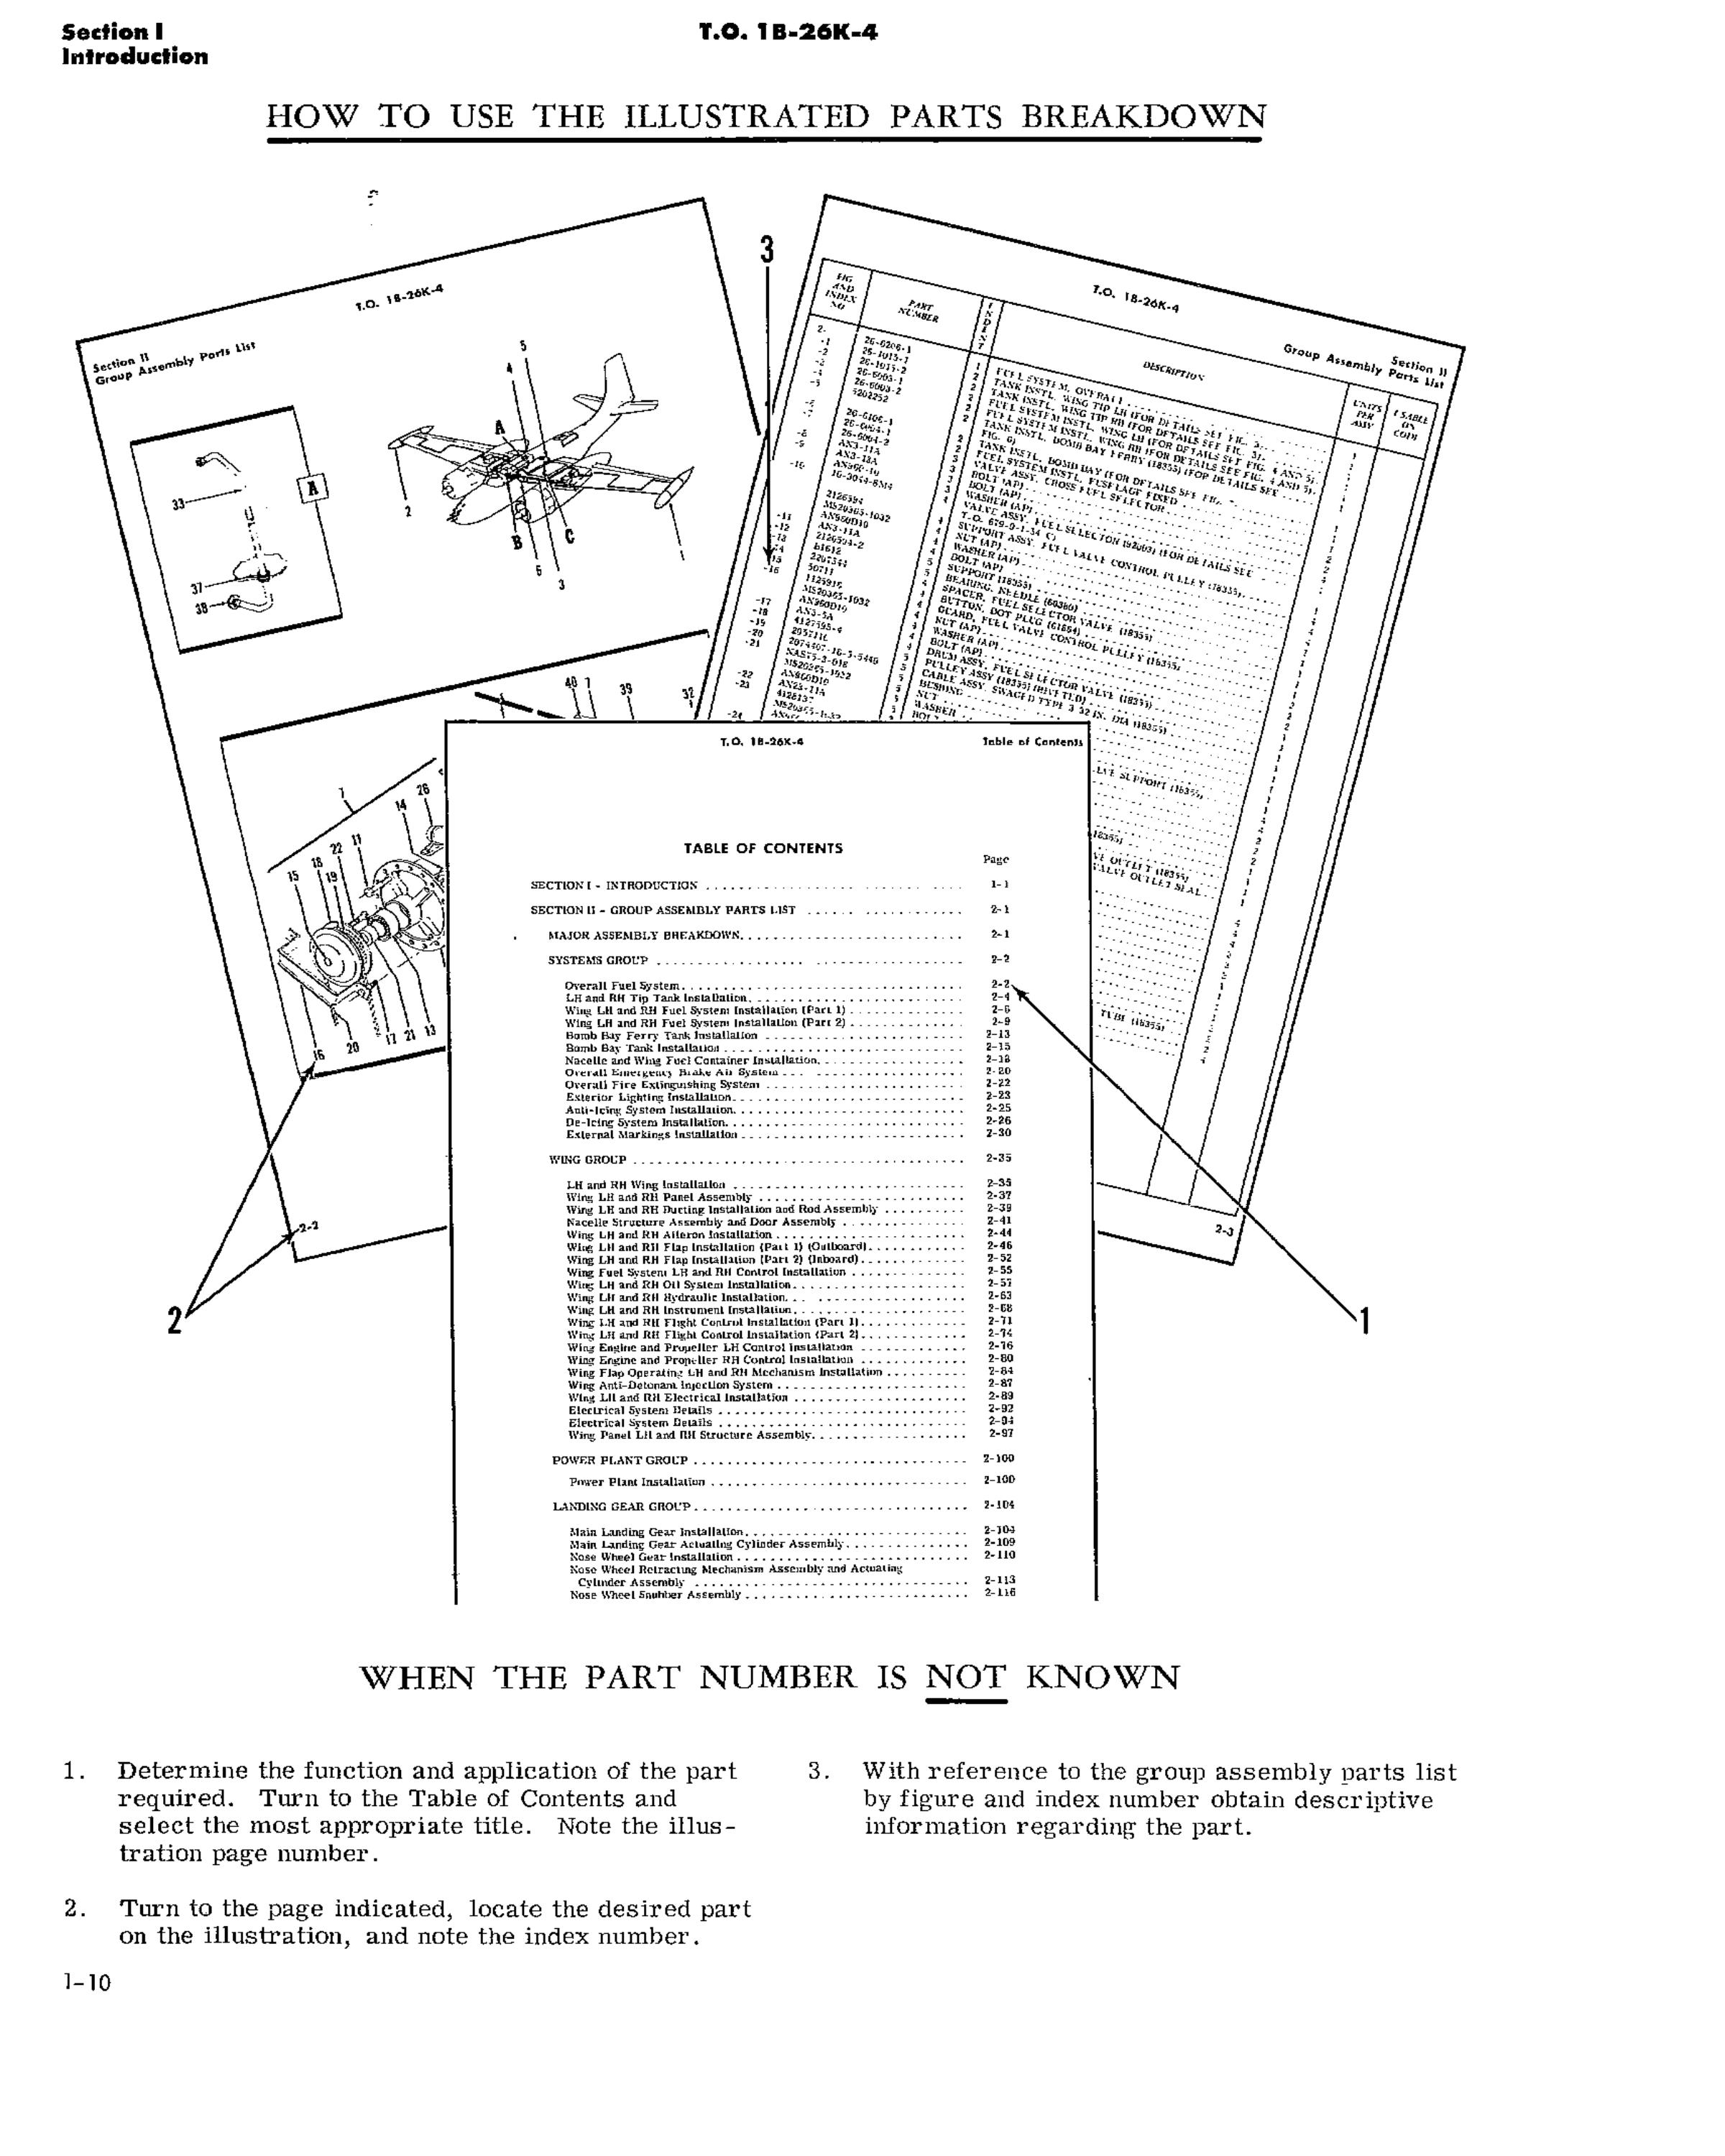 Sample page 16 from AirCorps Library document: Illustrated Parts Breakdown for B-26K Series Aircraft